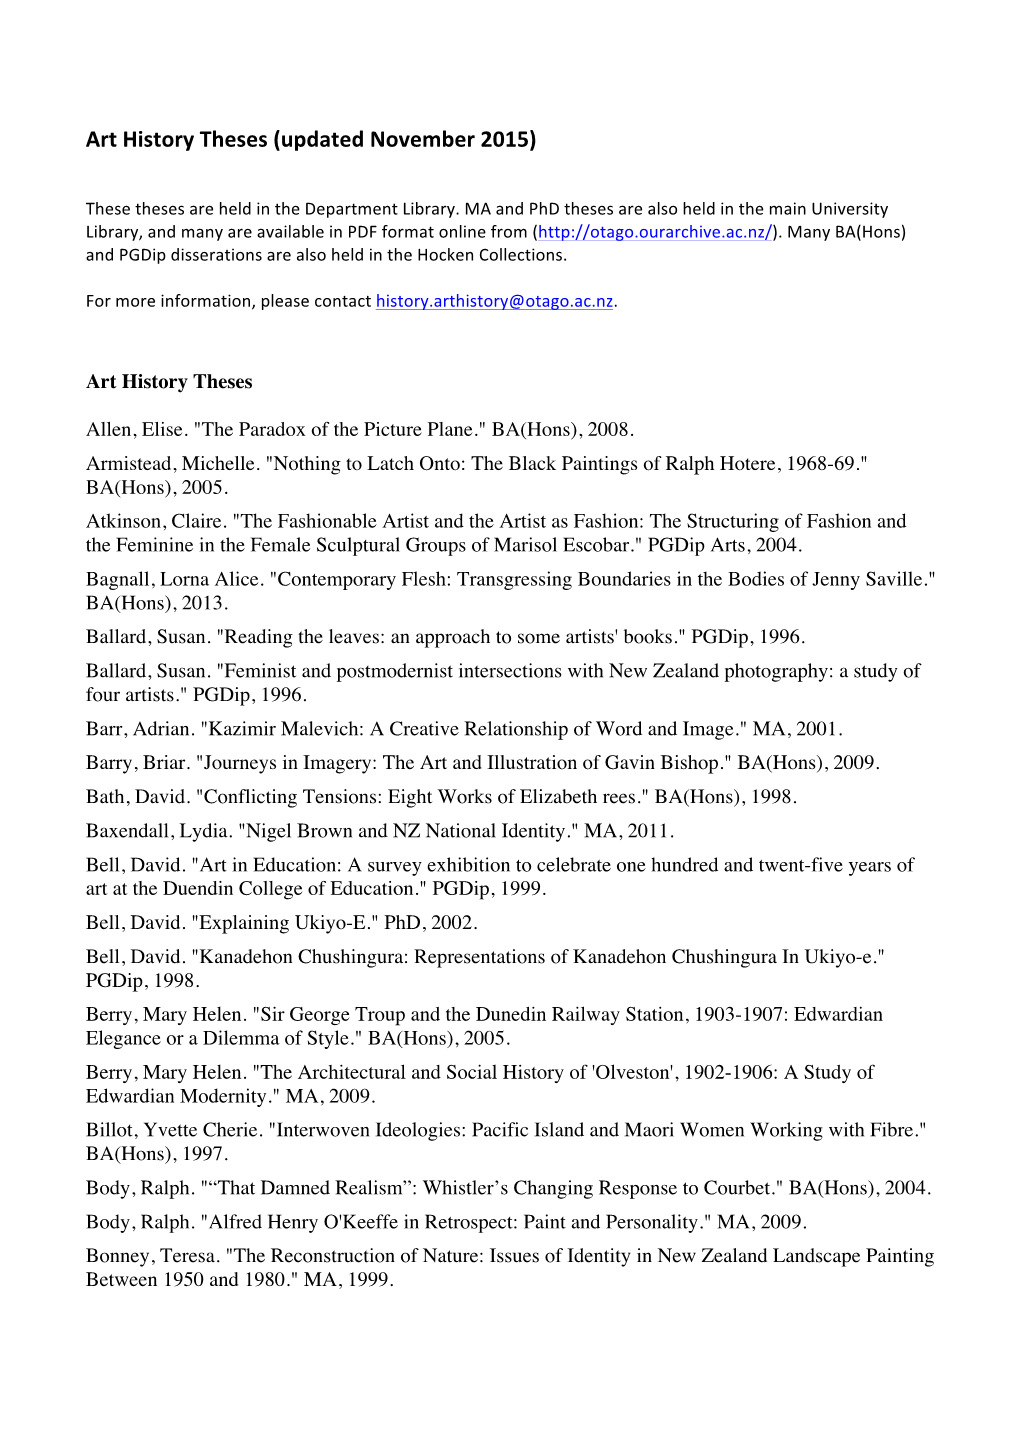 Art History Theses (Updated November 2015)